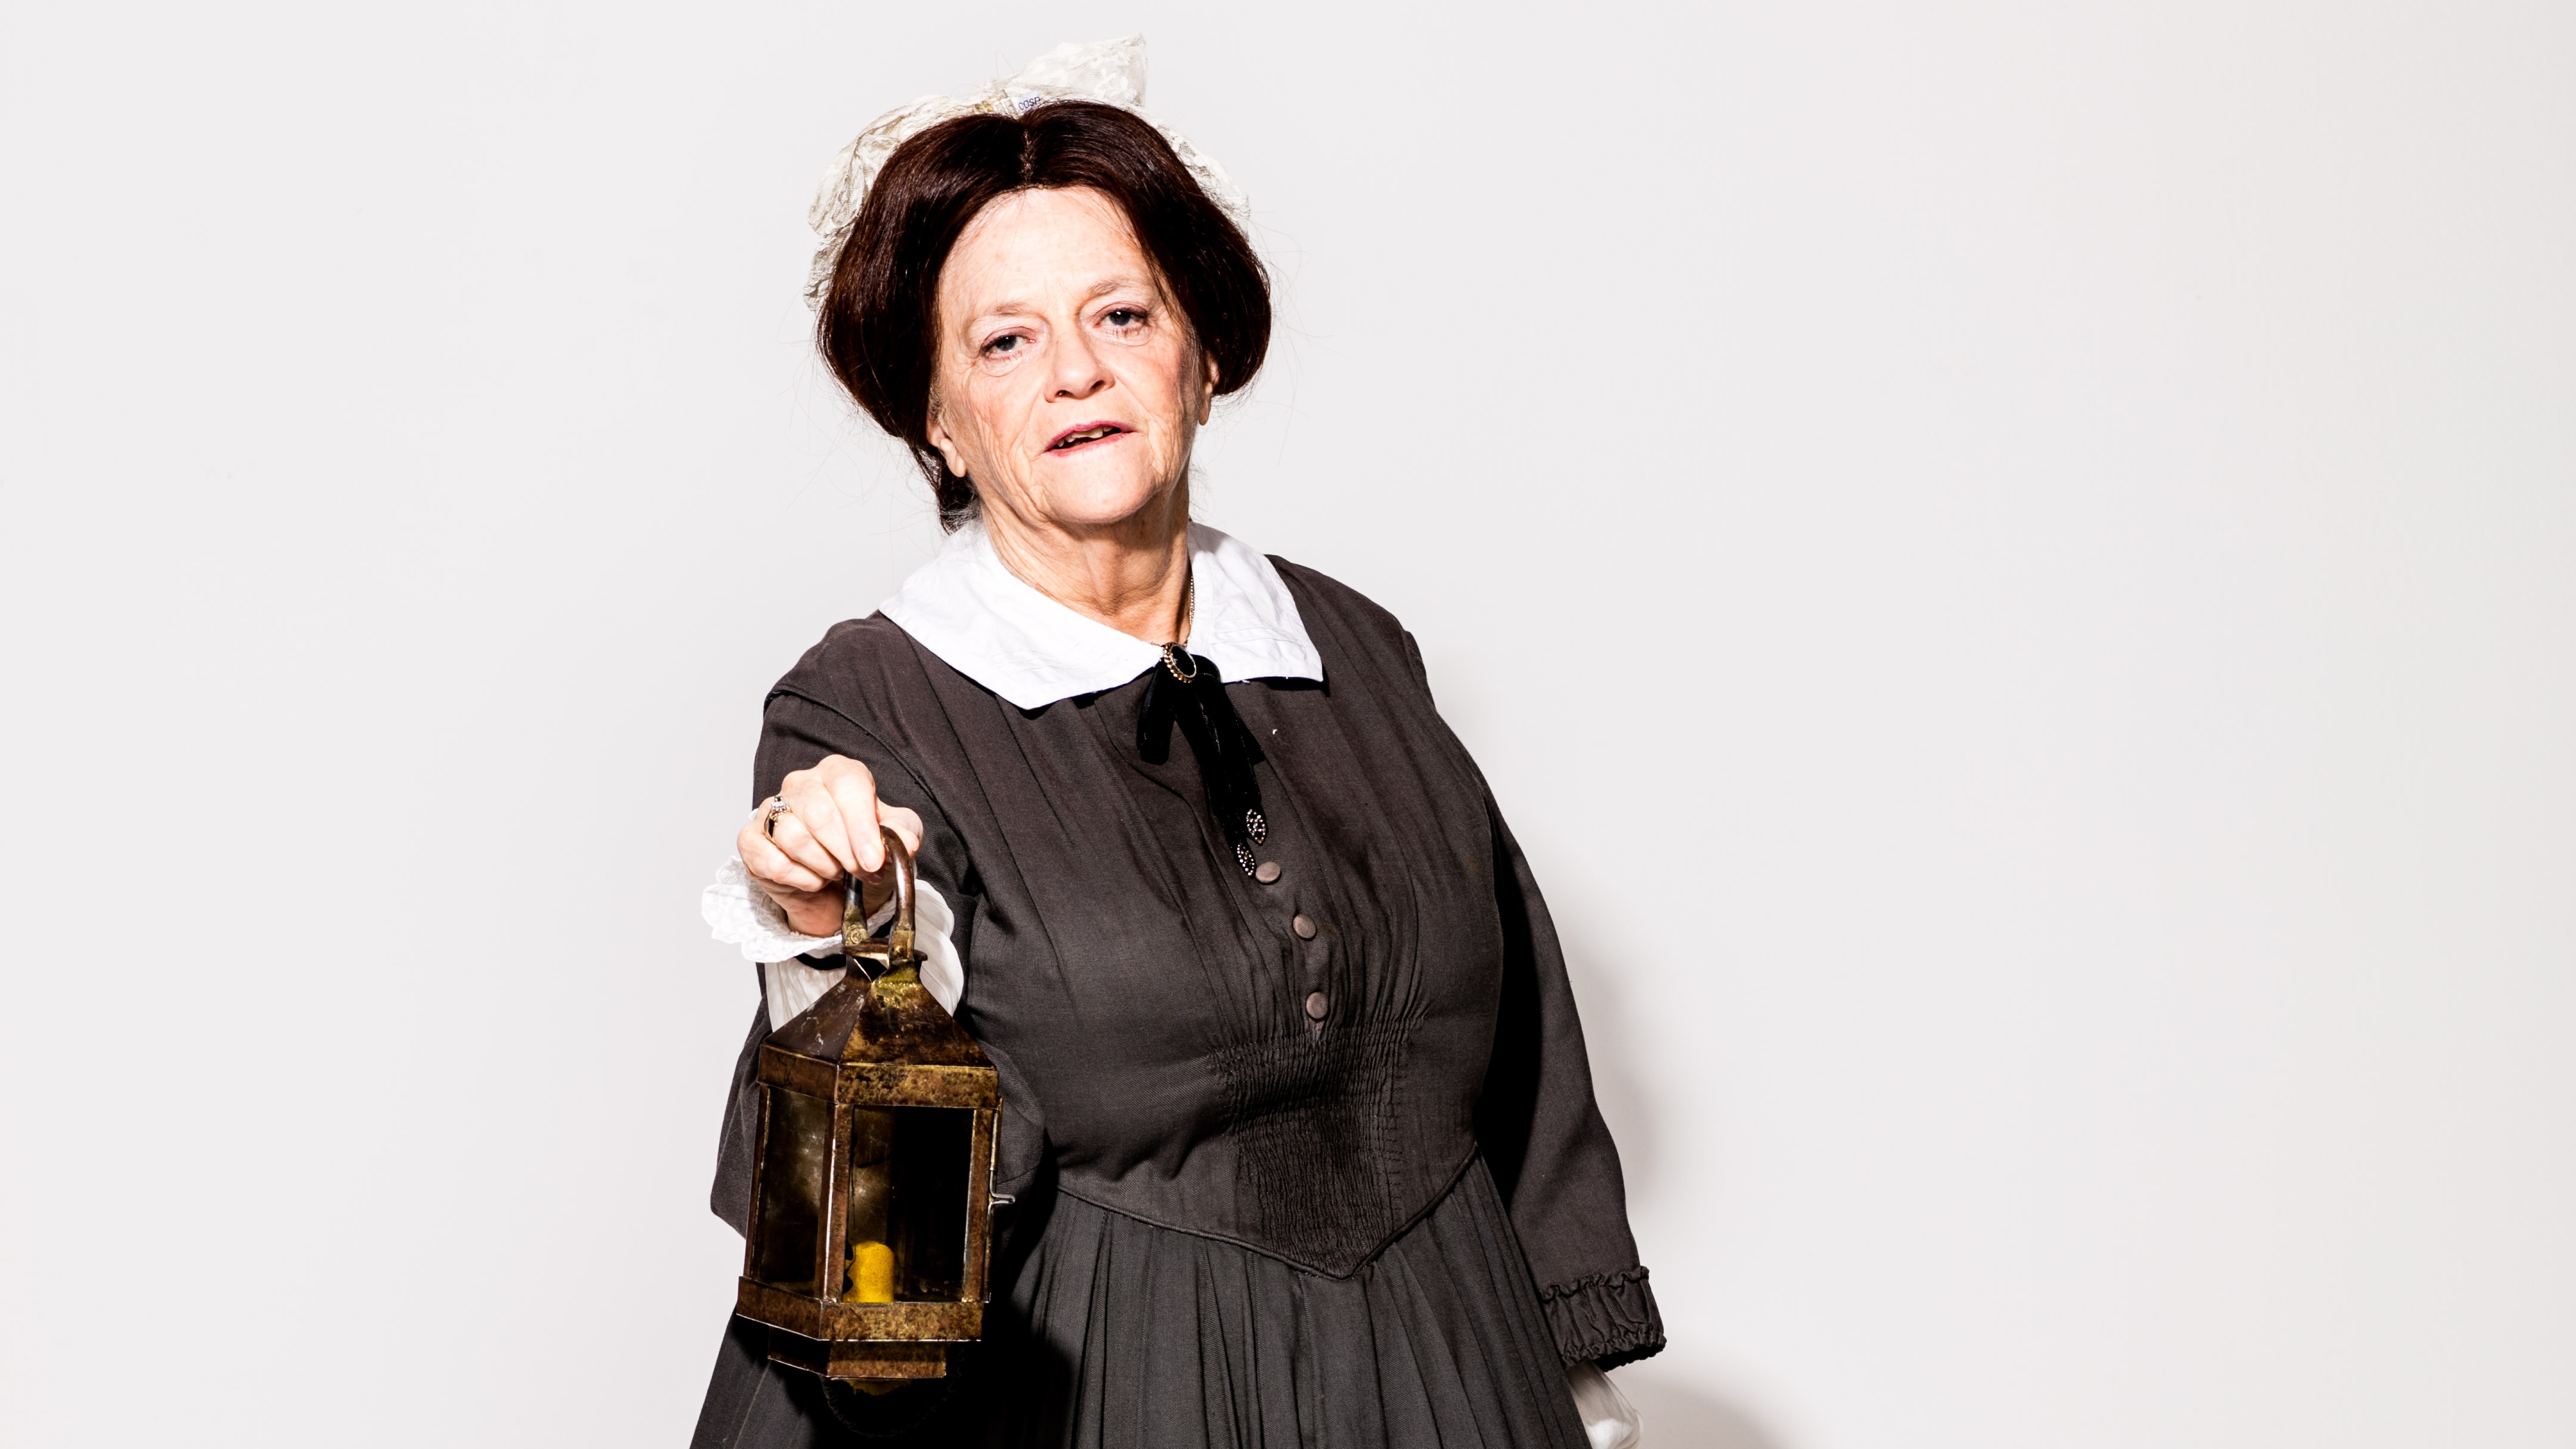 Ann Widdecombe as Florence Nightingale (Jon Enoch/Cancer Research UK/PA)